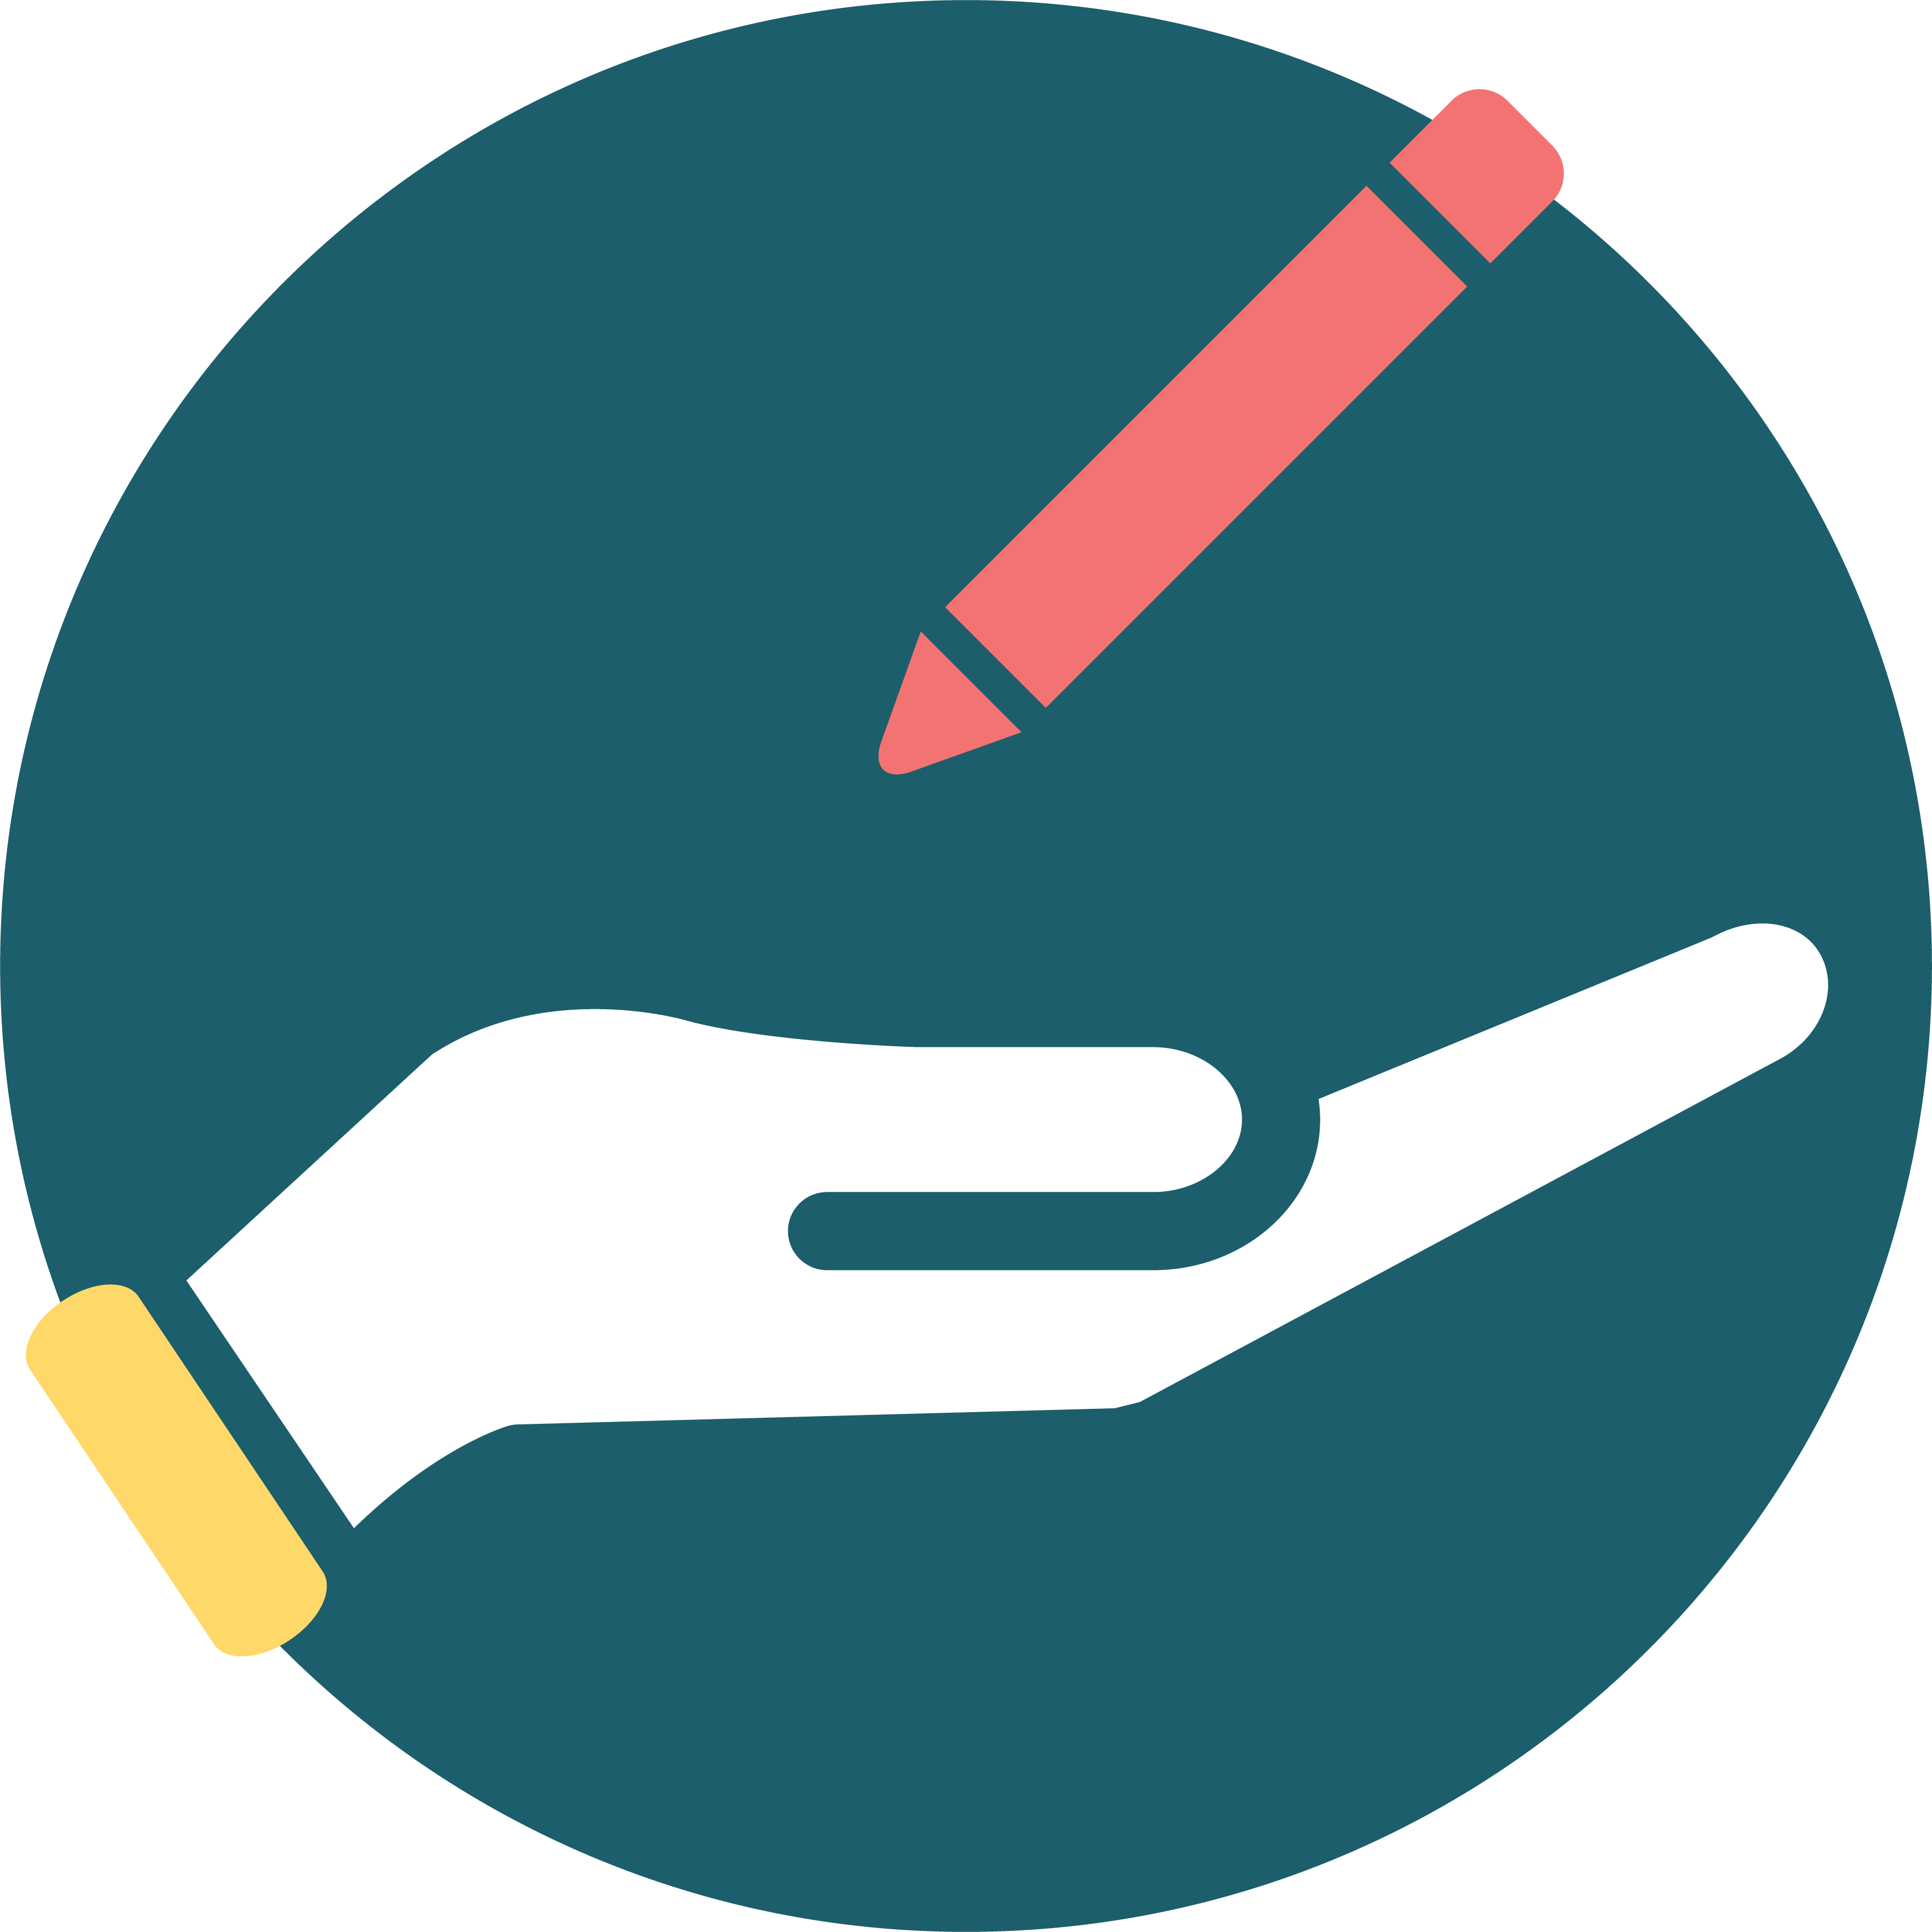 A hand holding a pencil in a circle offering Fleet Advisory Services.